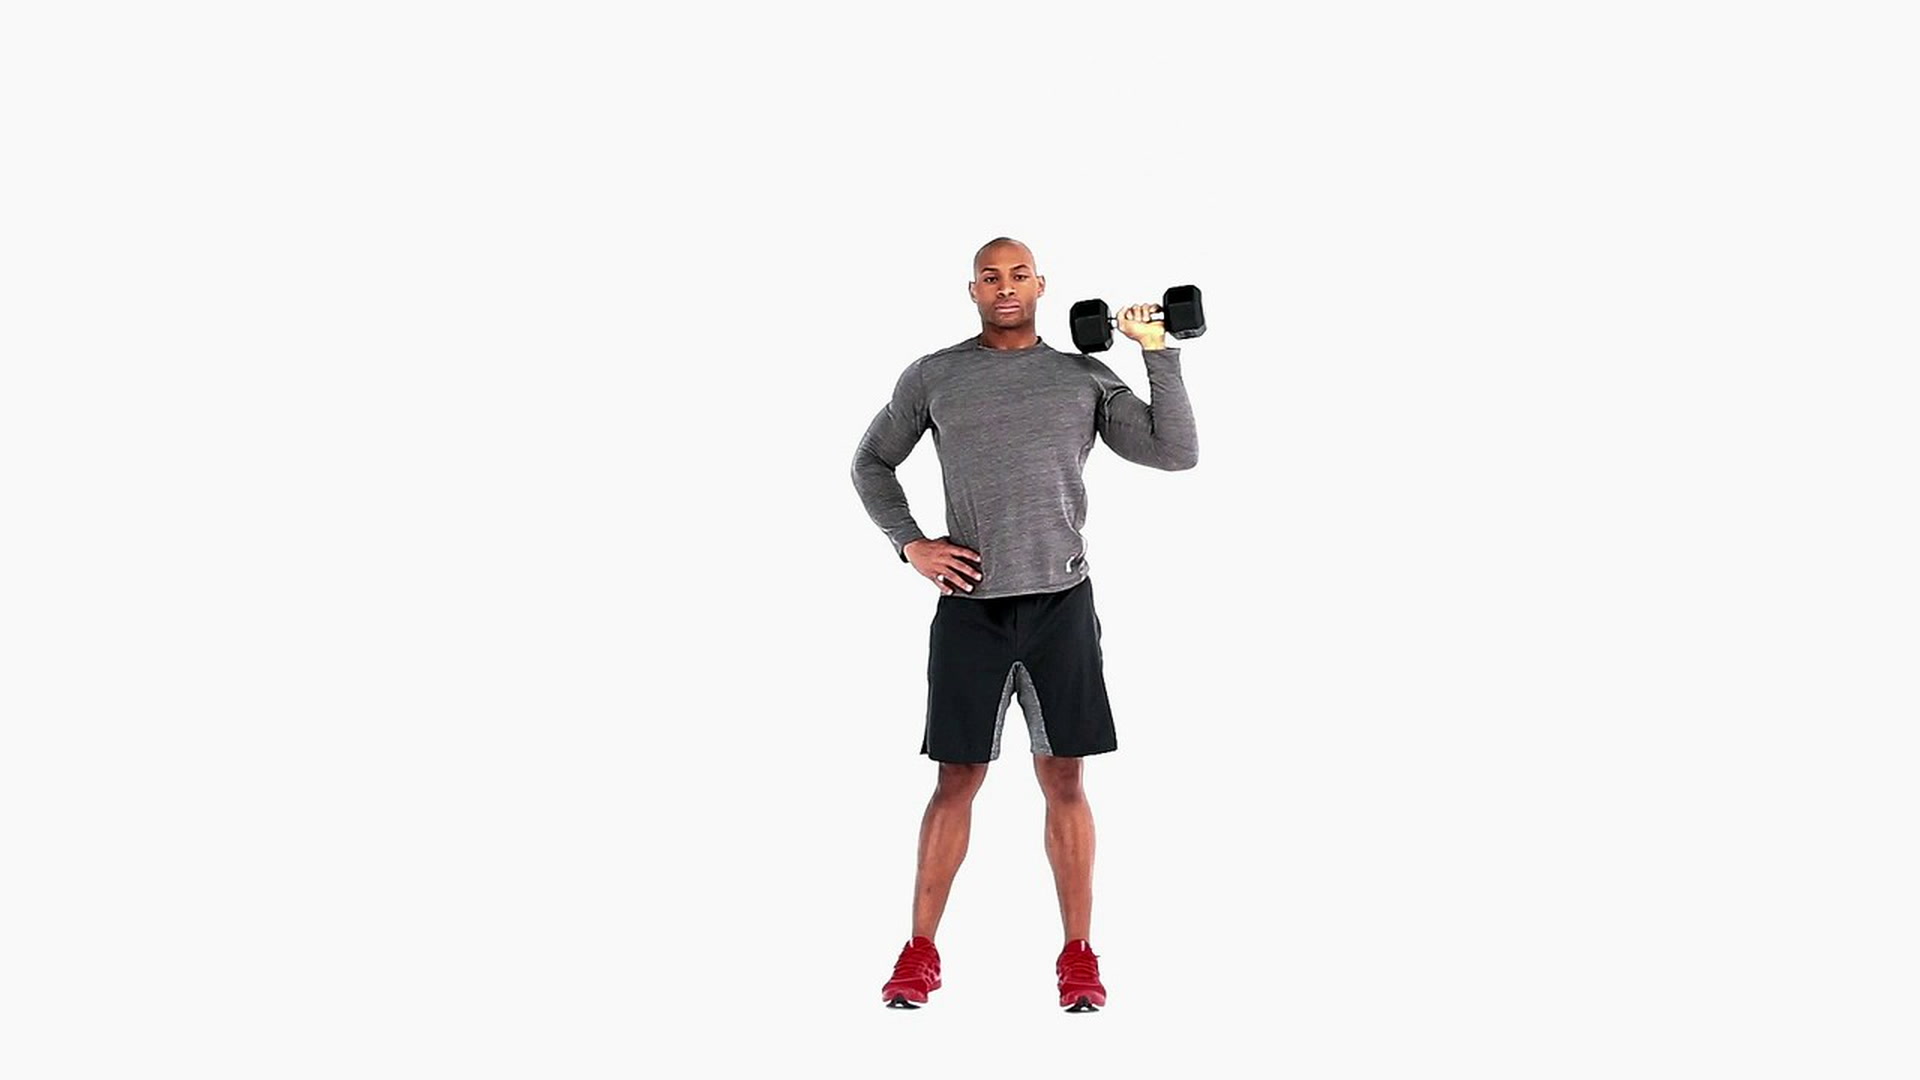 Single-arm Dumbbell Shoulder Press Exercise Video Guide | Muscle & Fitness